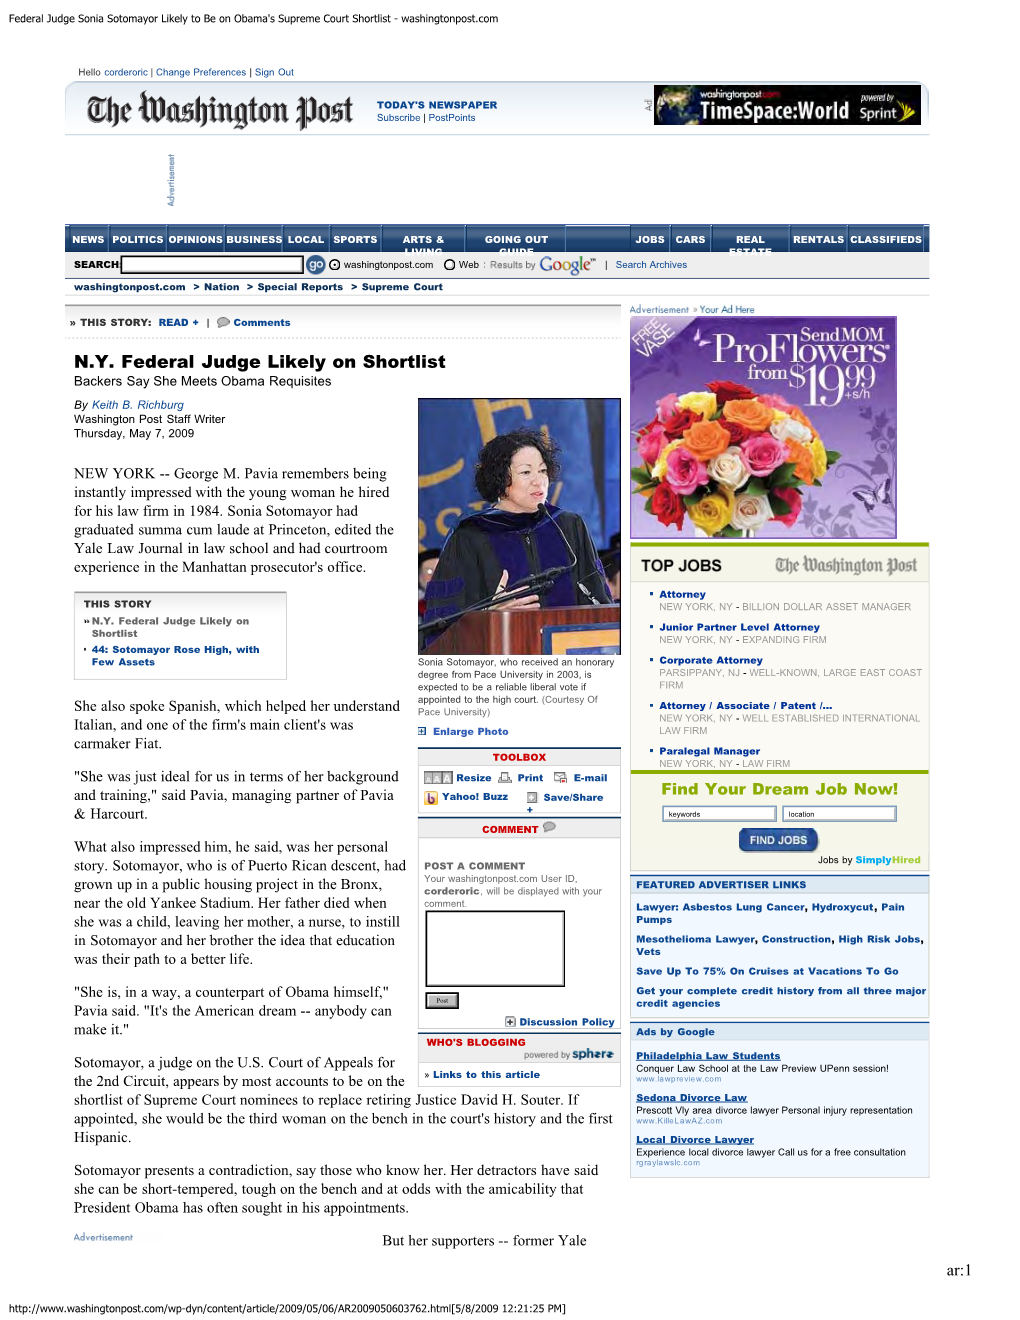 Articles on the Financials of Circuit Judge Sonia Sotomayor of the U.S